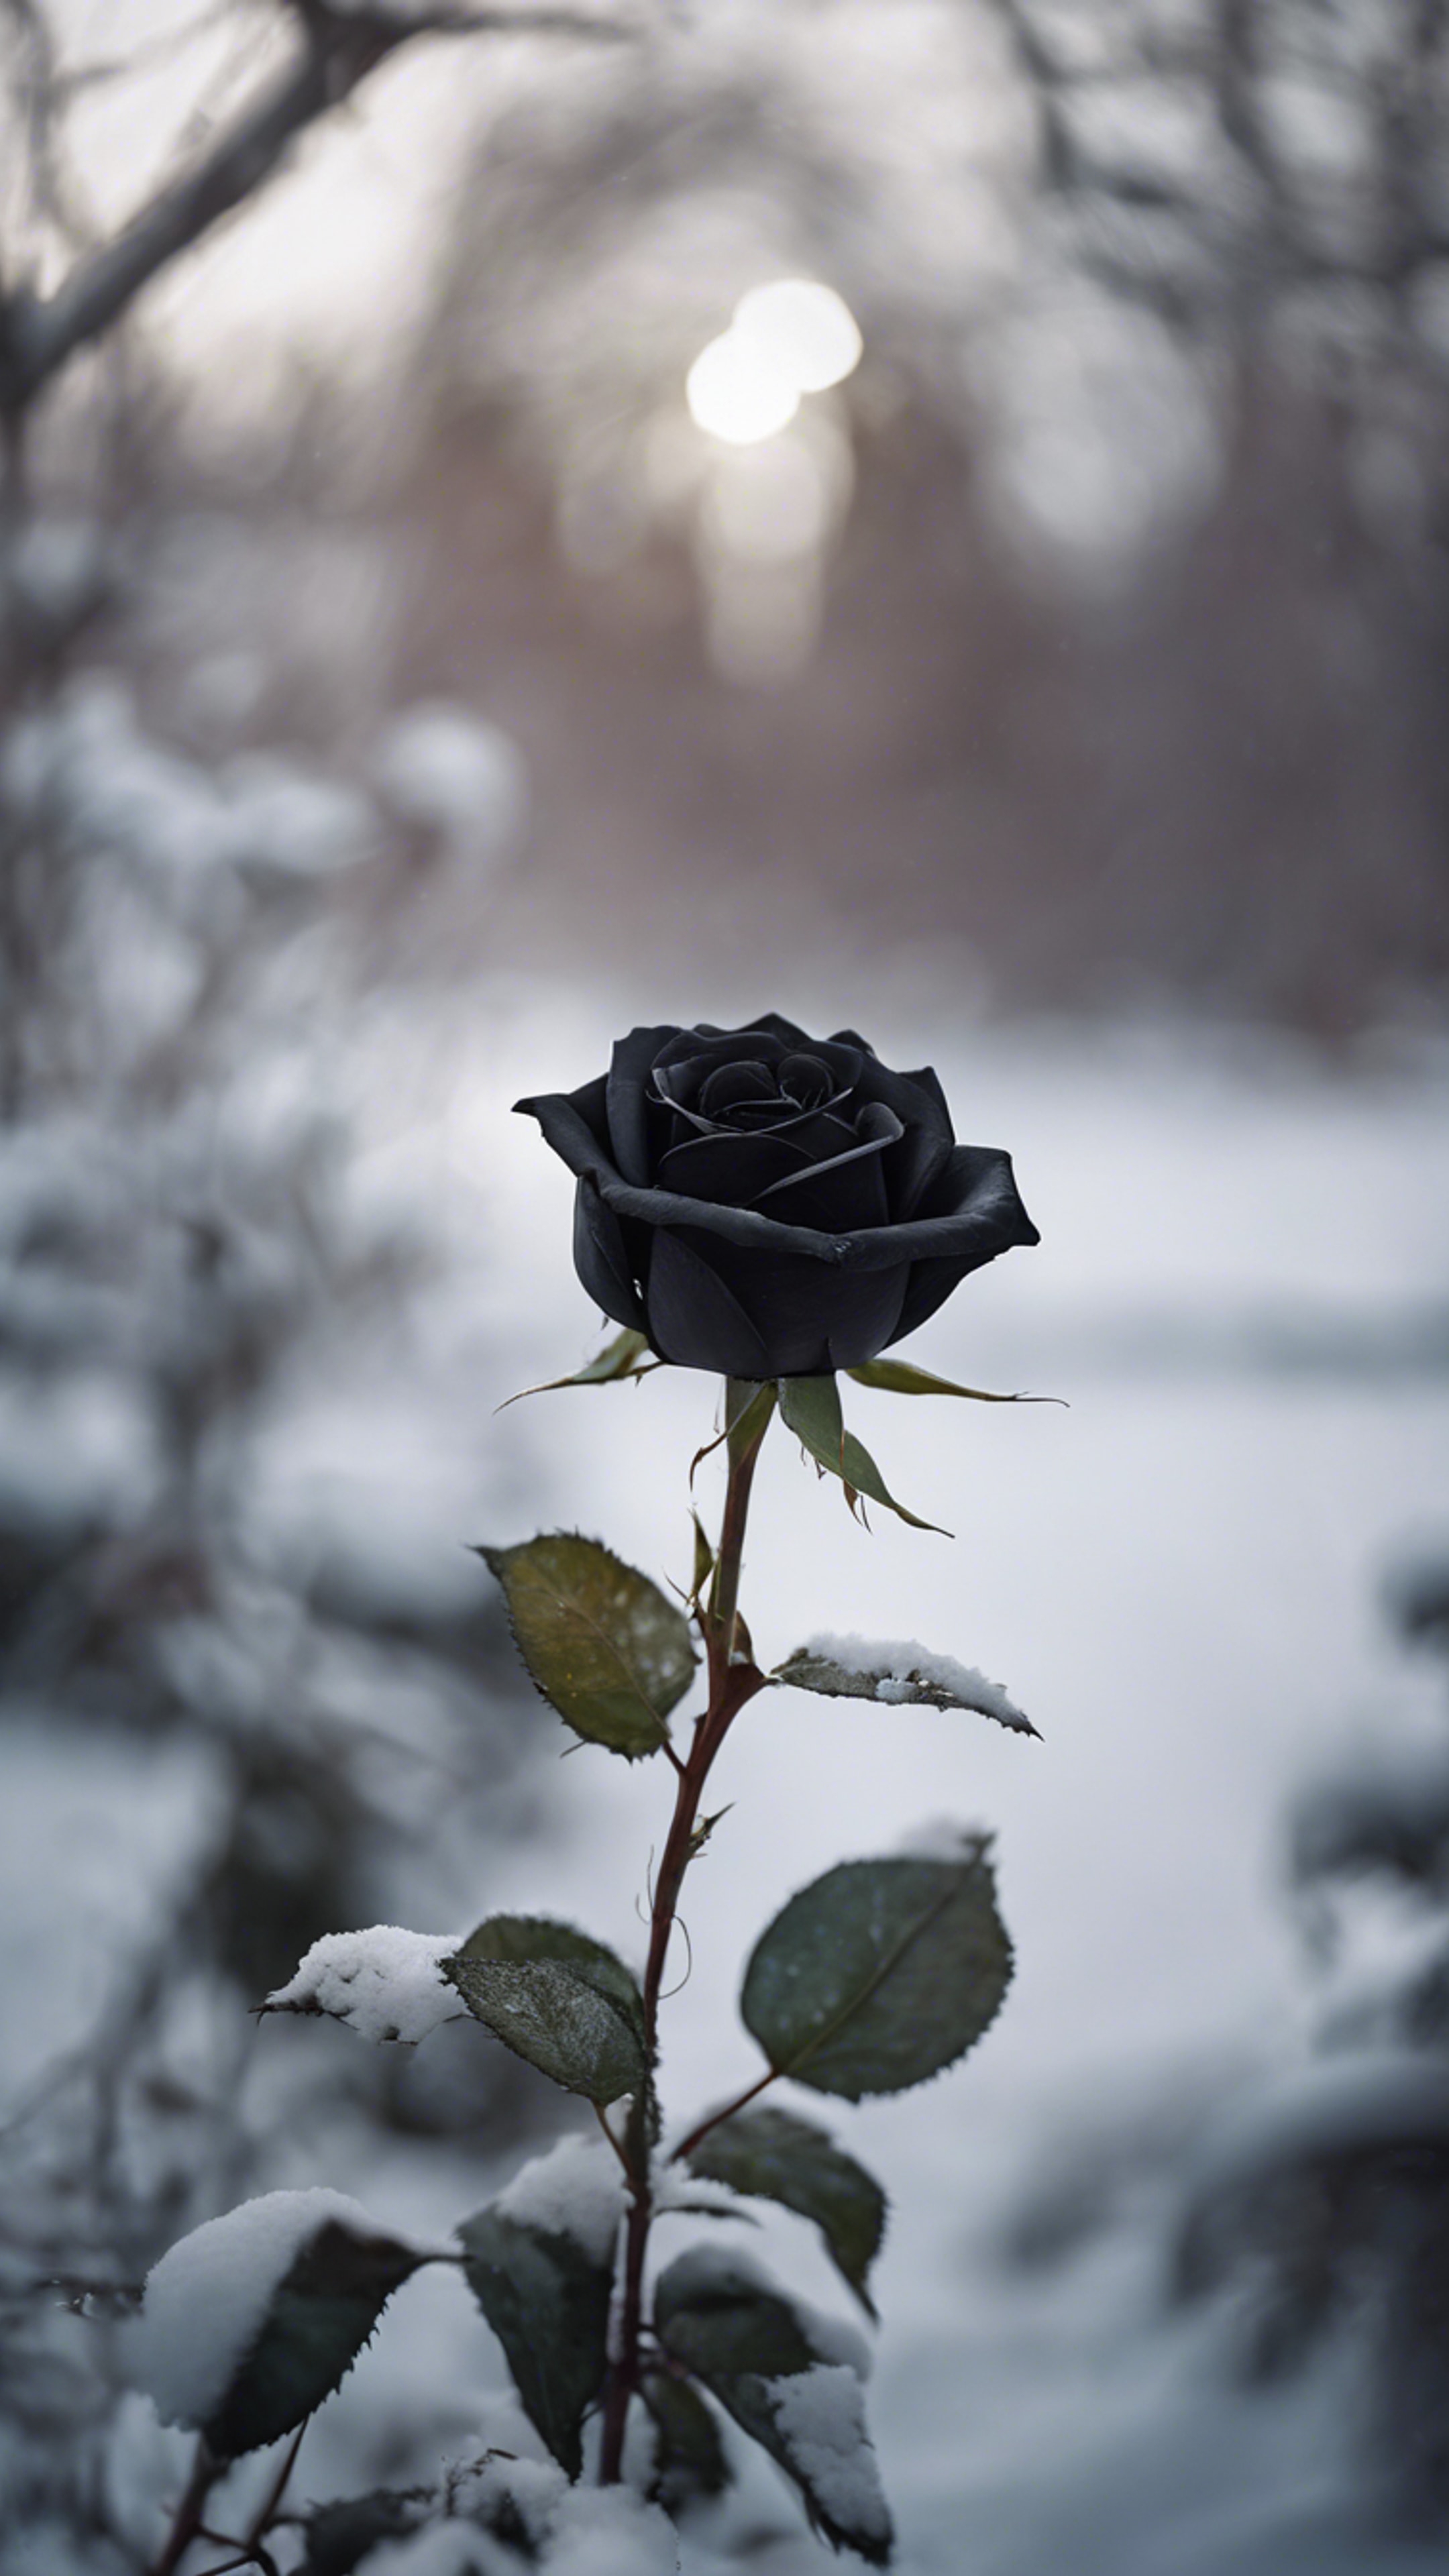 A single, dramatic black rose blooming against the stark backdrop of a snow-covered garden.壁紙[12d80e94a68945fa833e]